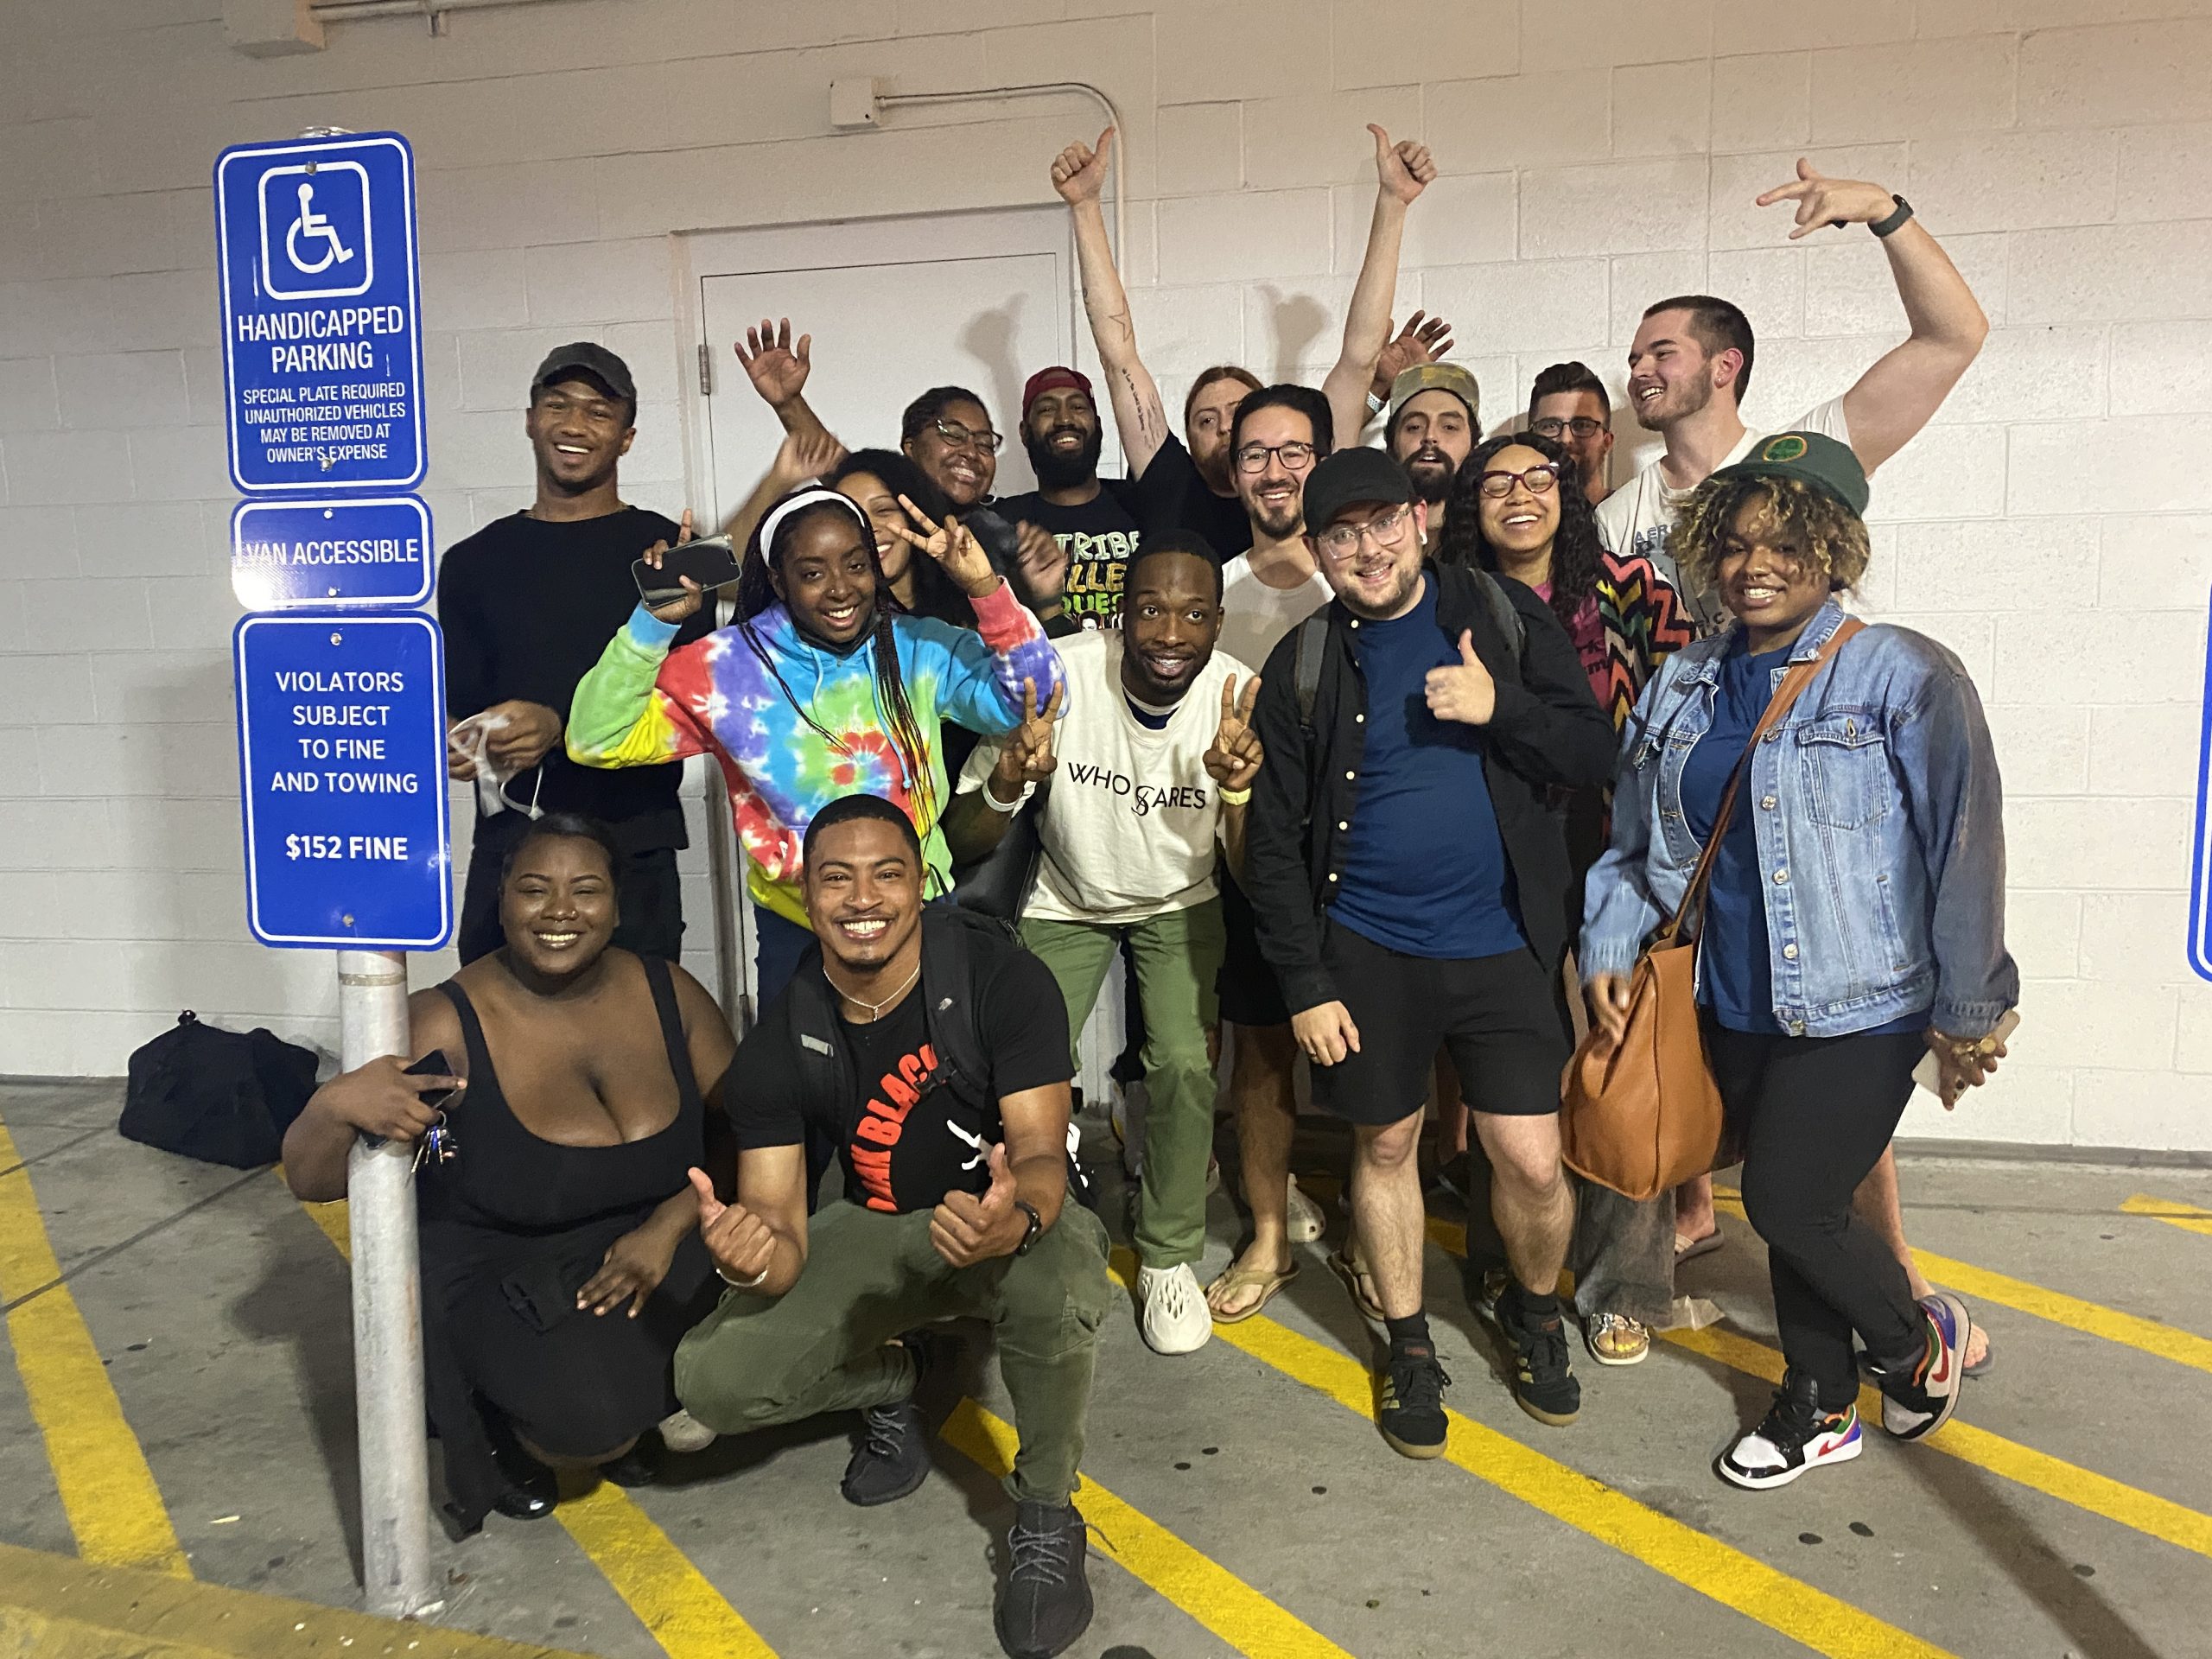 Machinists Union’s Coalition of Organized Retail Employees Wins Historic Organizing Campaign to Represent Towson, Md. Apple Workers